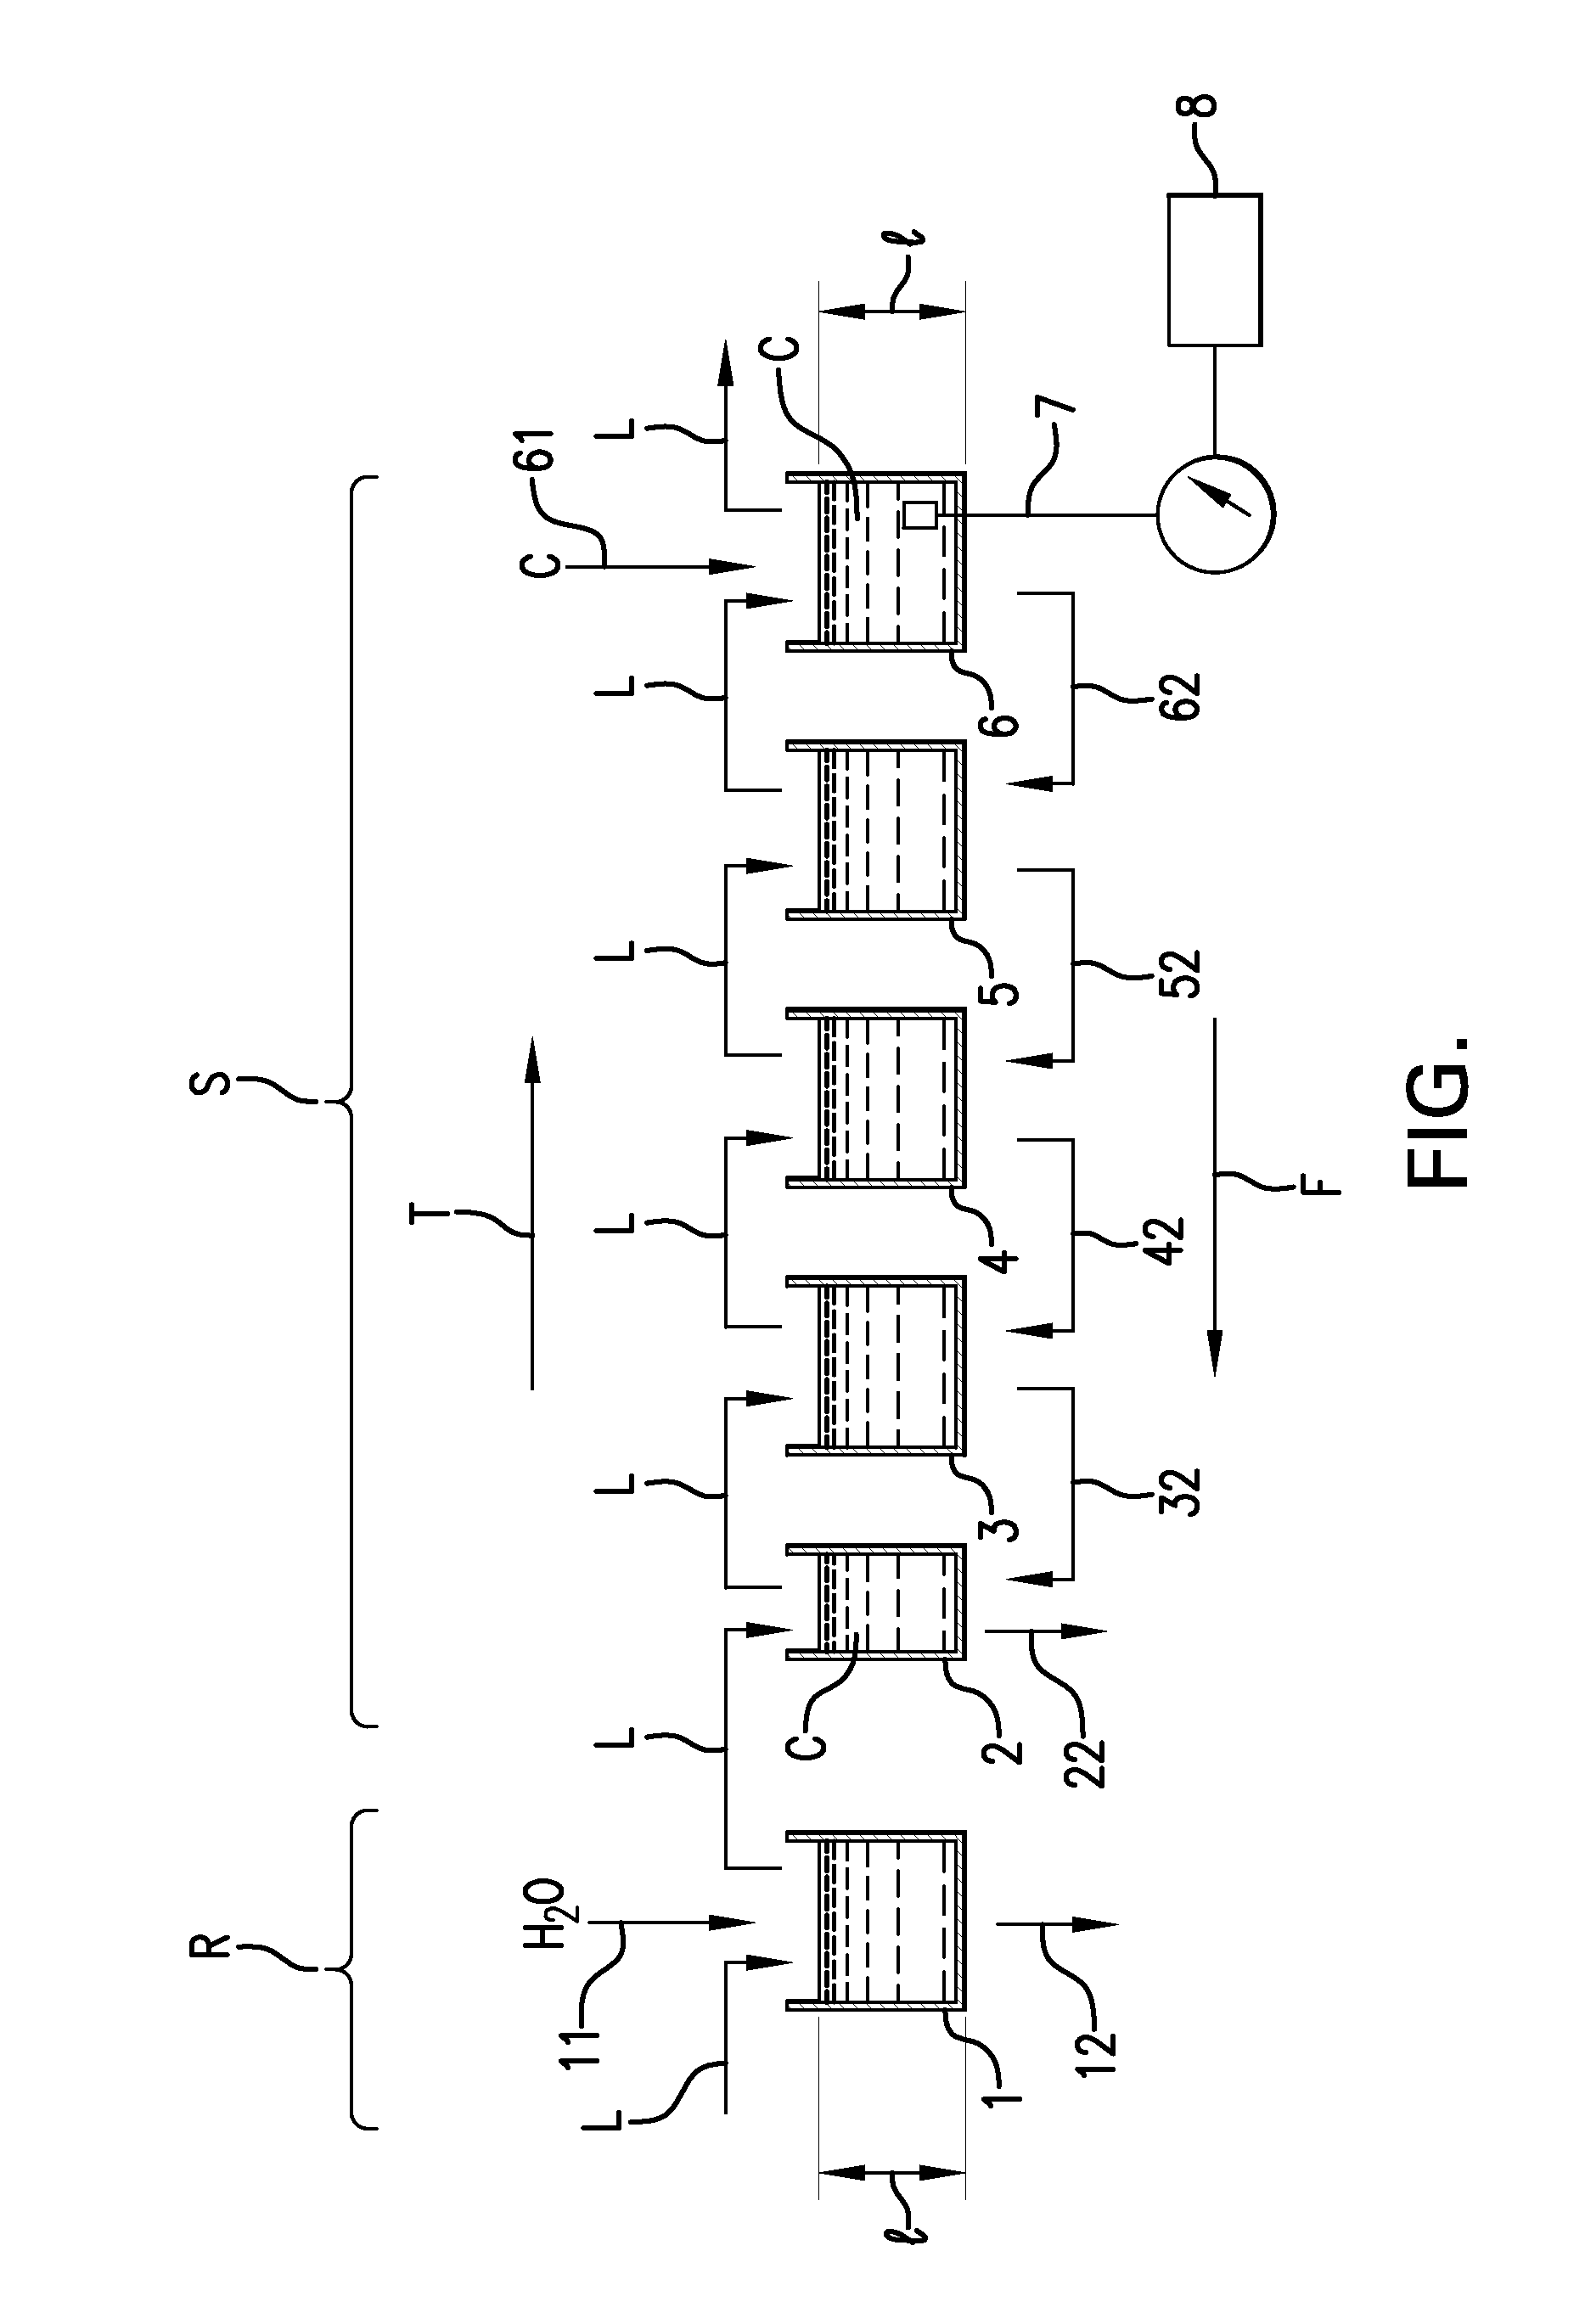 Method and Device for Maintaining a Concentration of a Treatment Bath